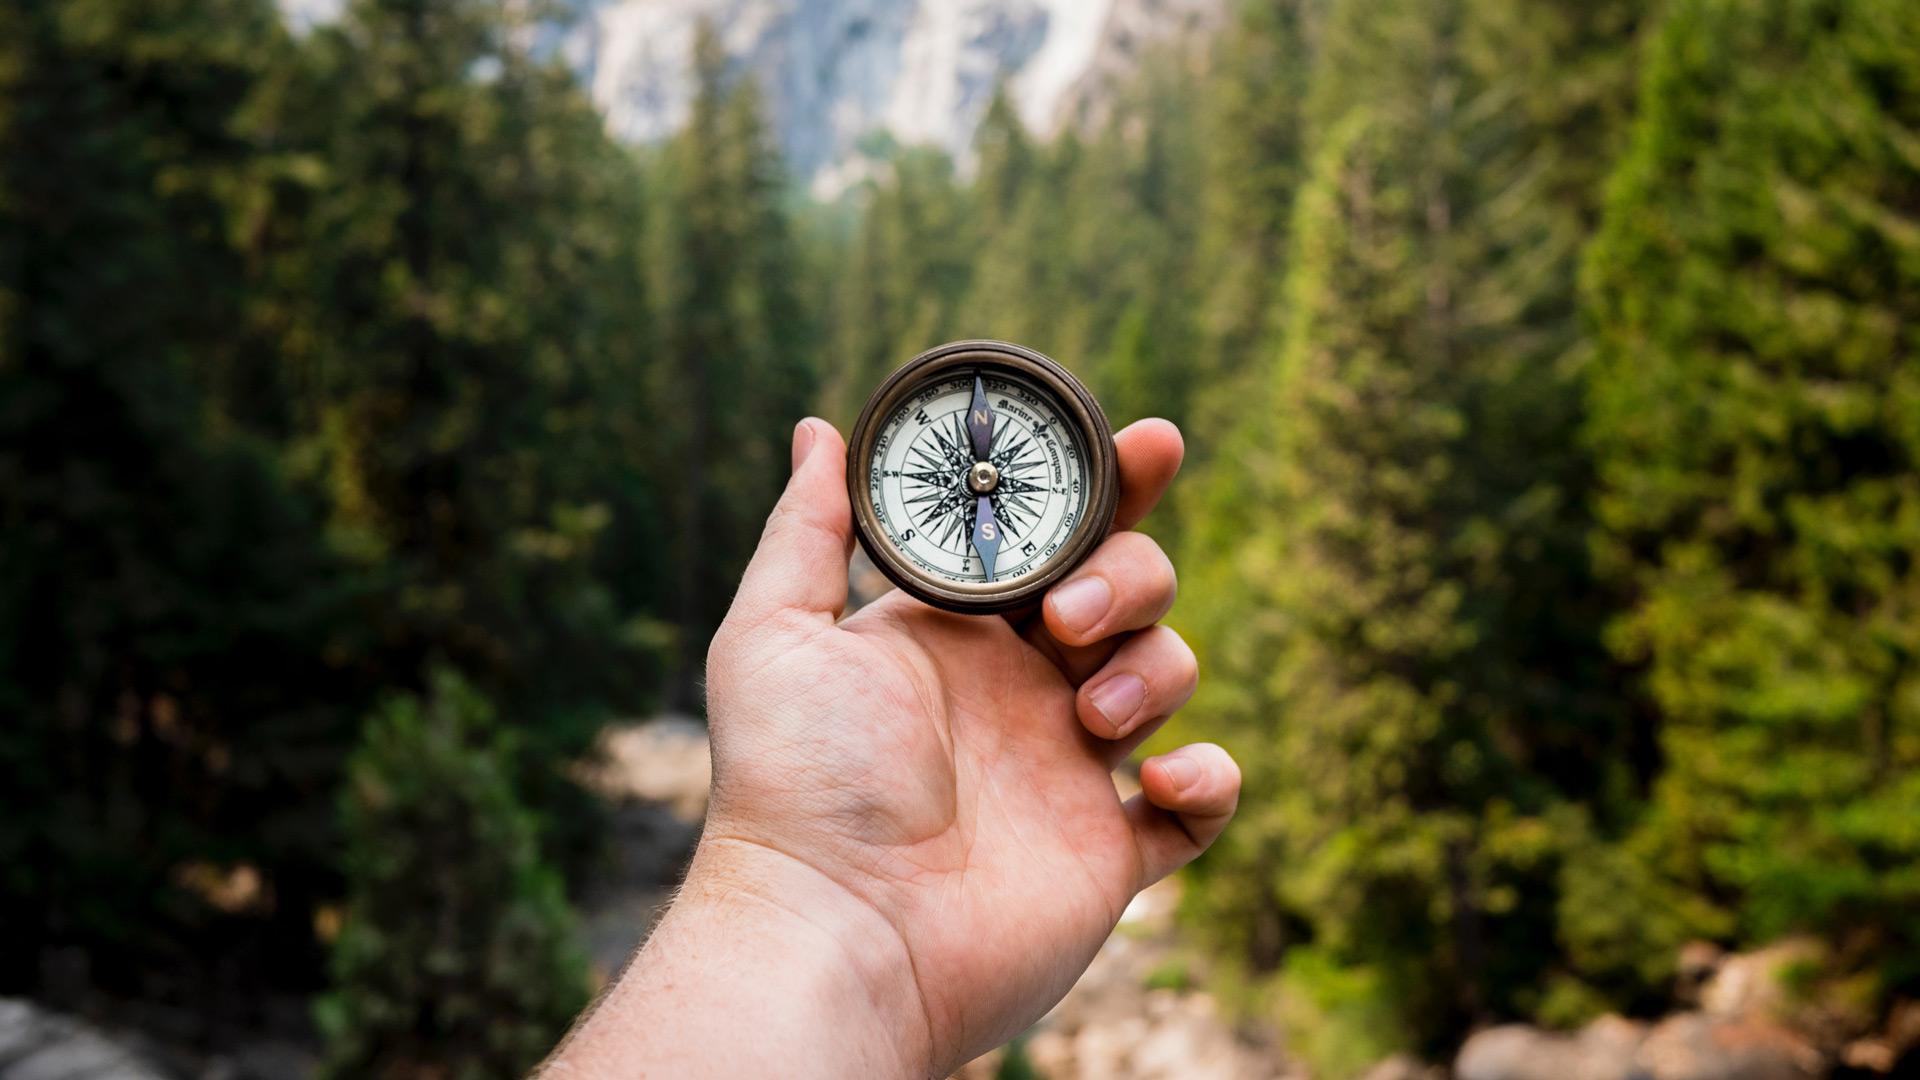 Outstretched hand holding a compass. (Jamie Street - Unsplash.com)